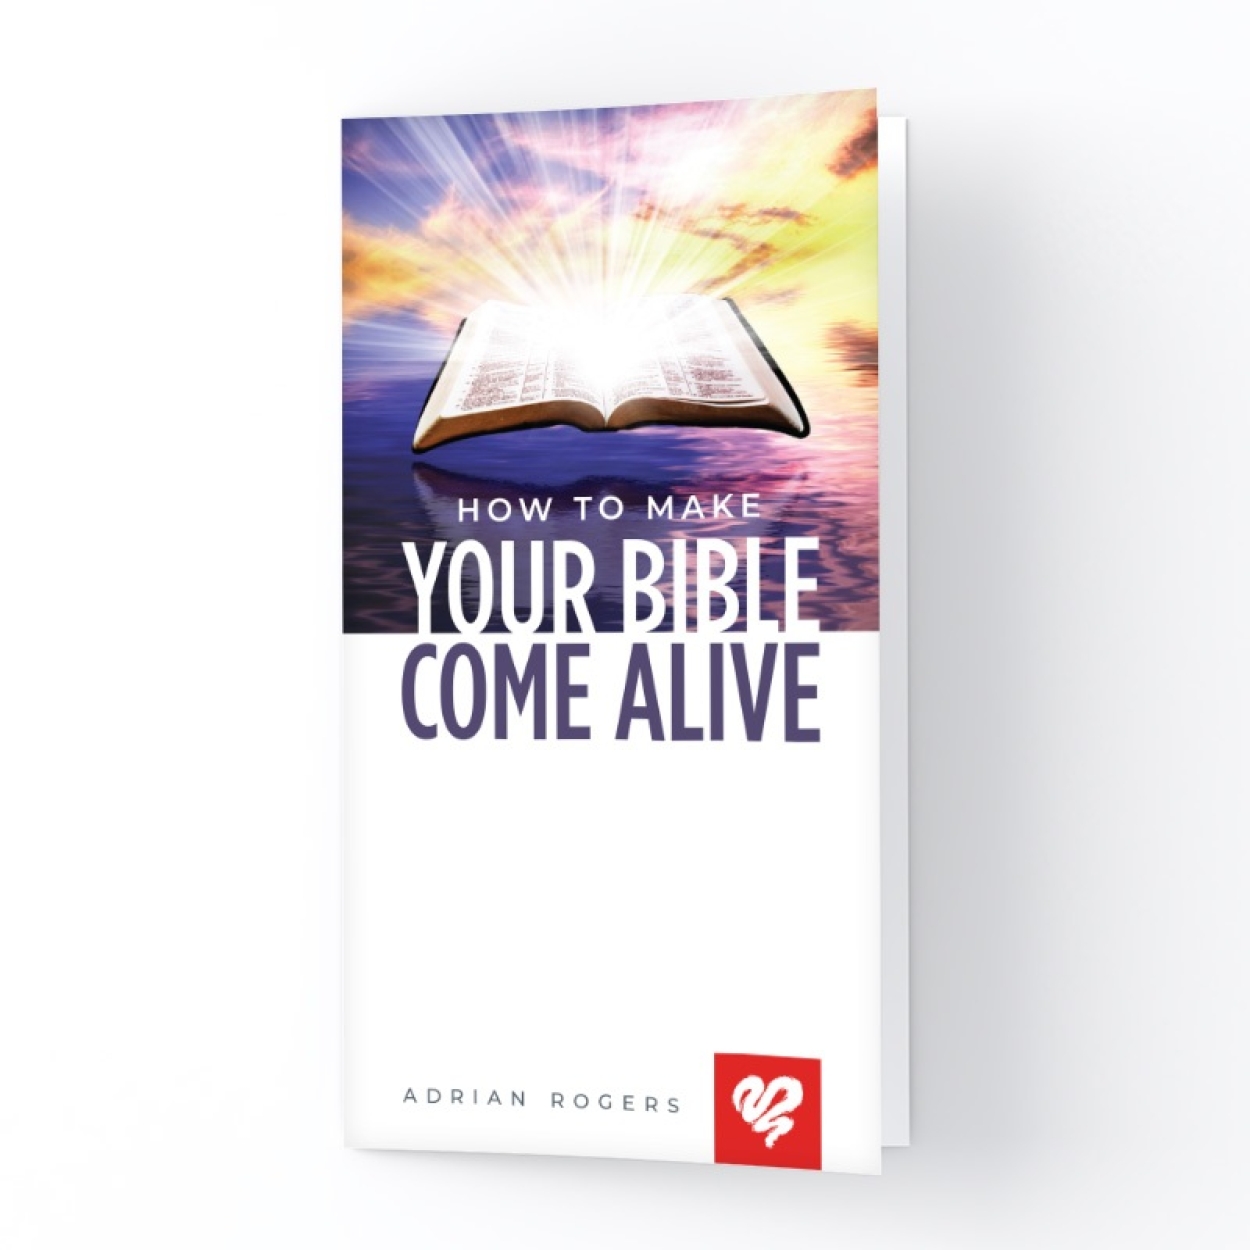 K138 How to Make Your Bible Come Alive 3 D Square